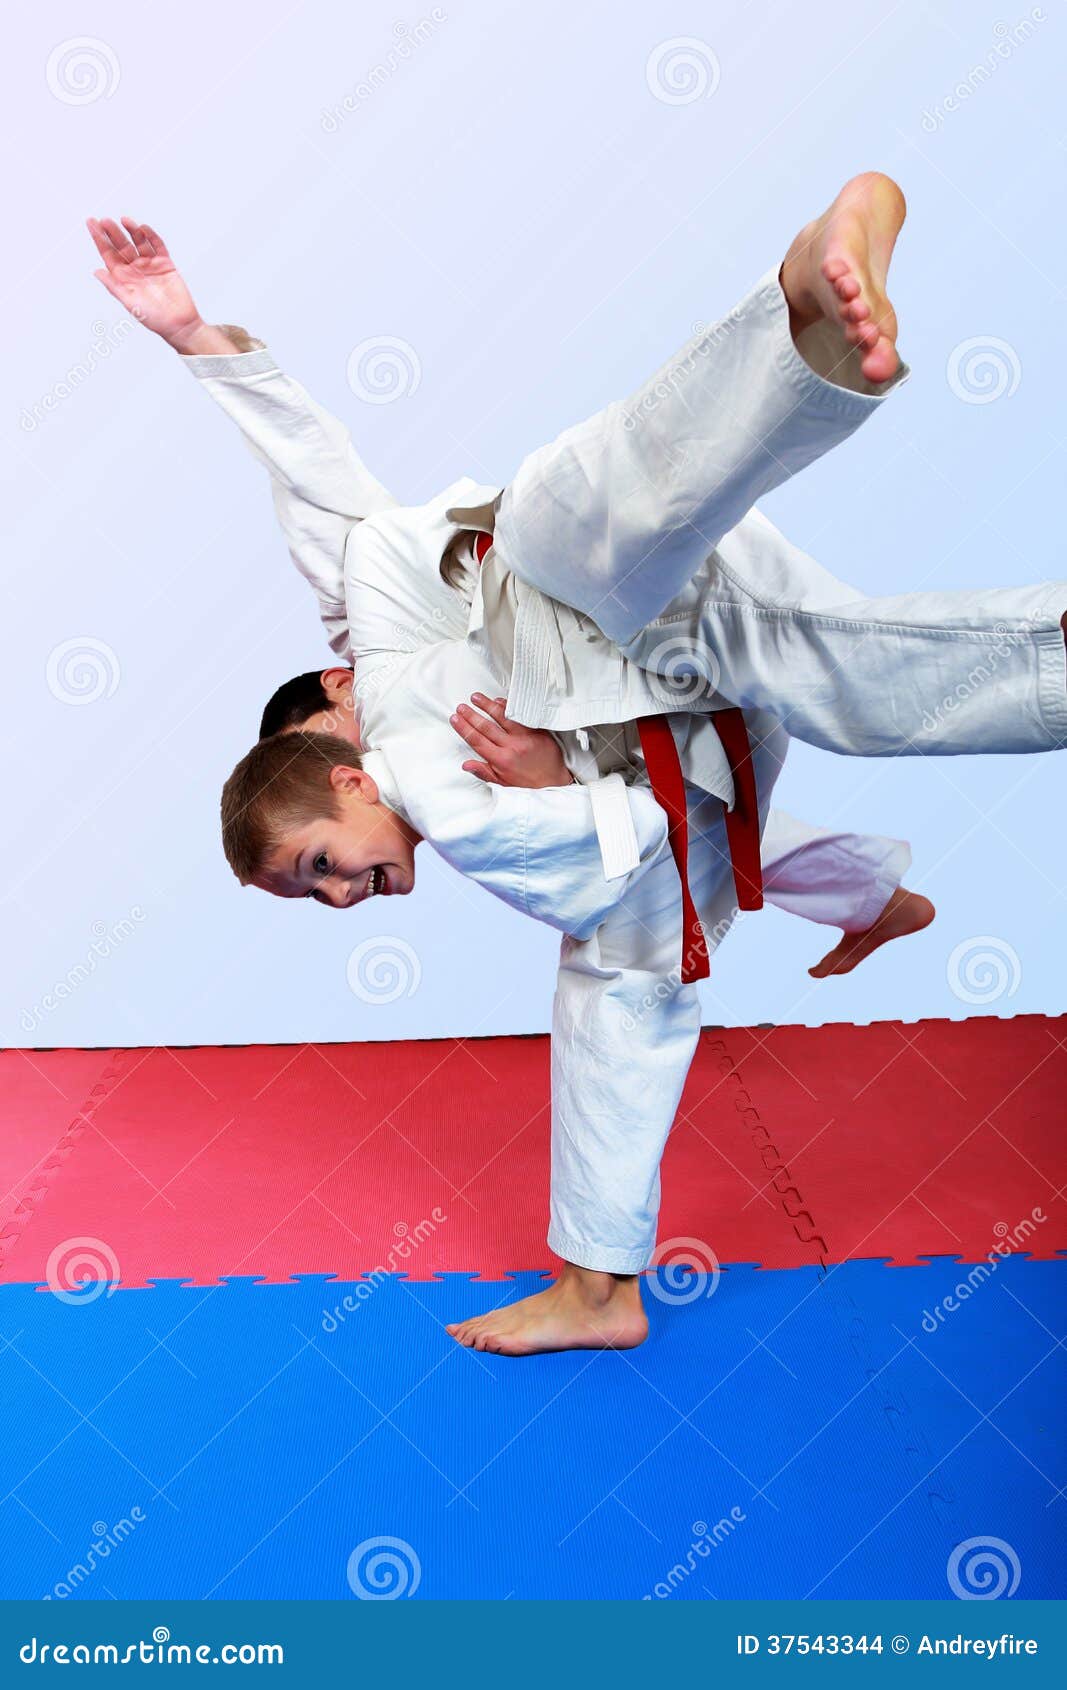 Small Athlete With A White Belt Performs Throw Judo Stock Images